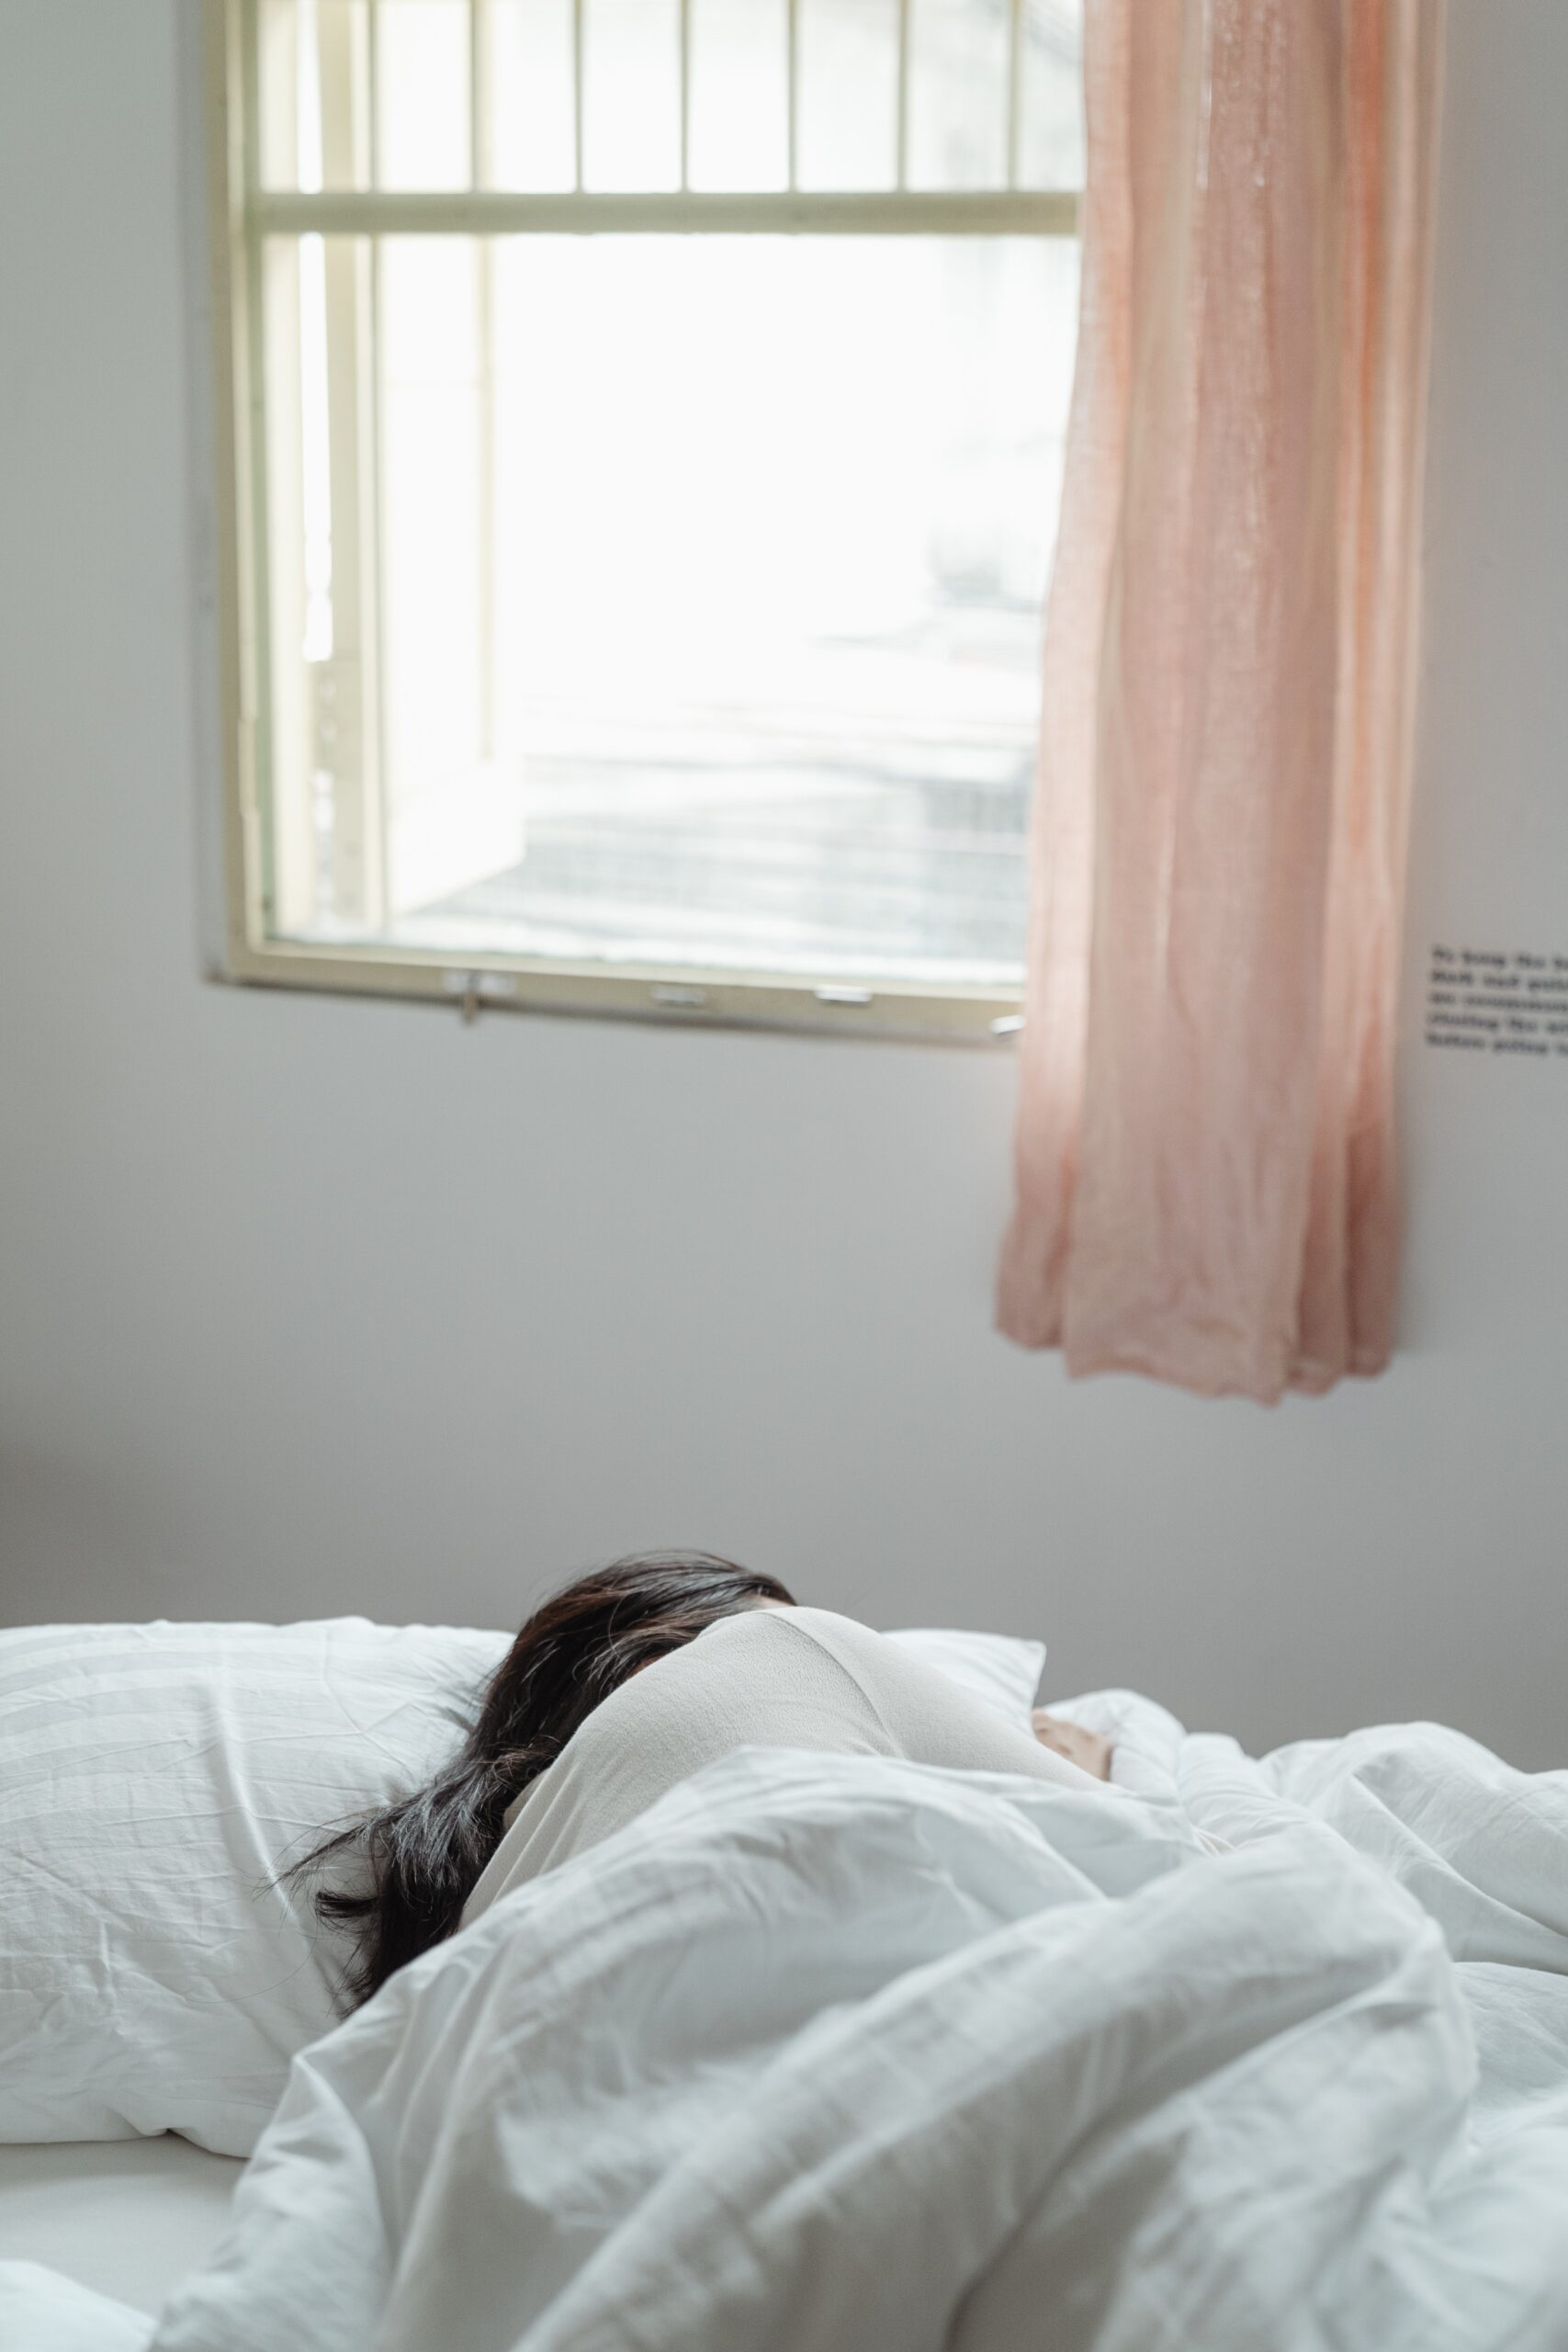 A woman asleep during the day